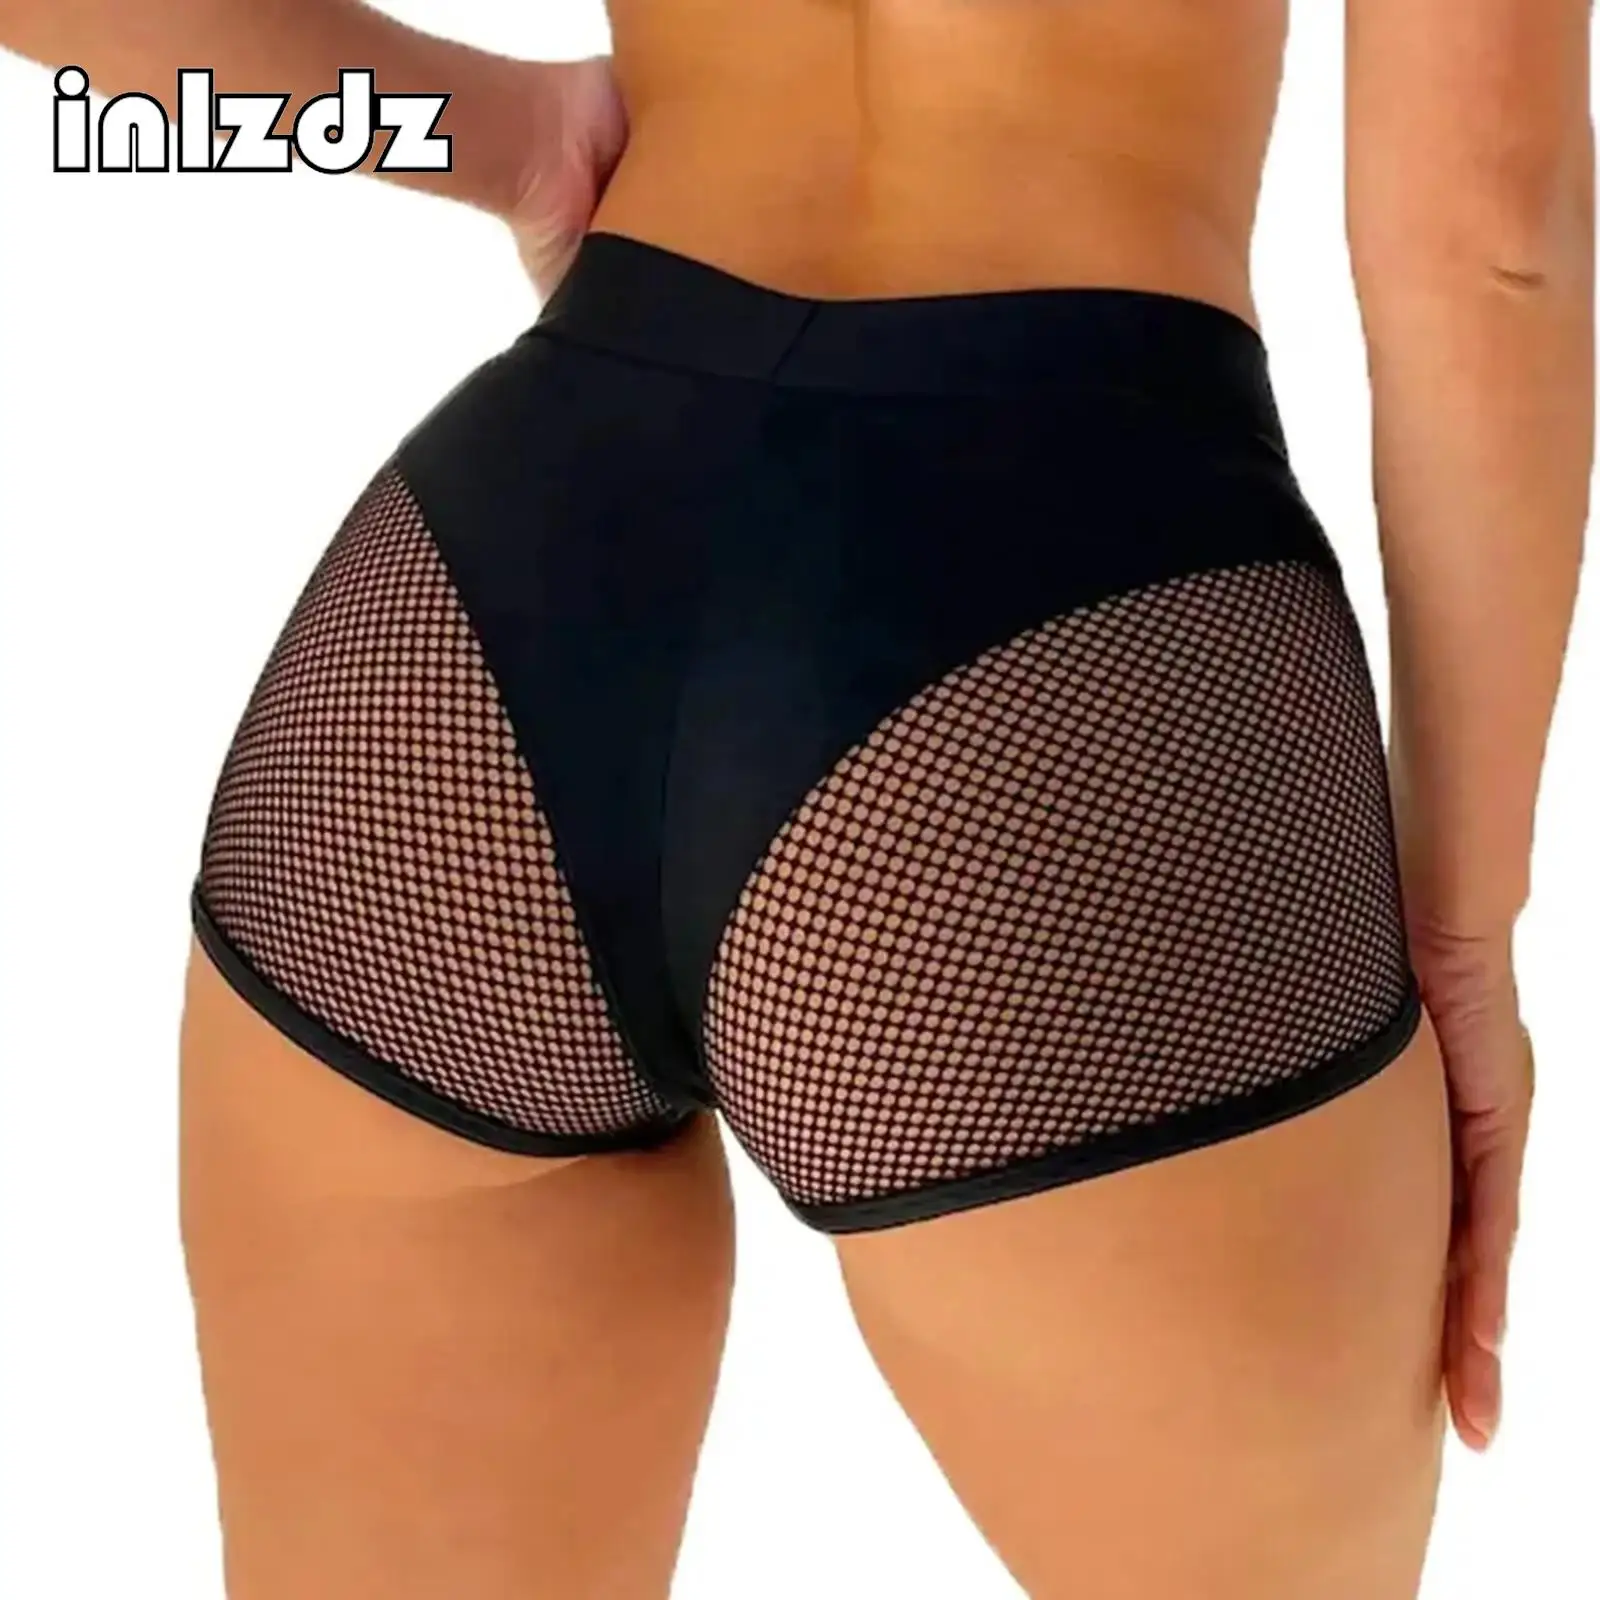 

Womens Hollow Out Fishnet Booty Shorts Mid Waist Elastic Waistband Hot Pants for Sports Fitness Workout Yoga Pole Dancing